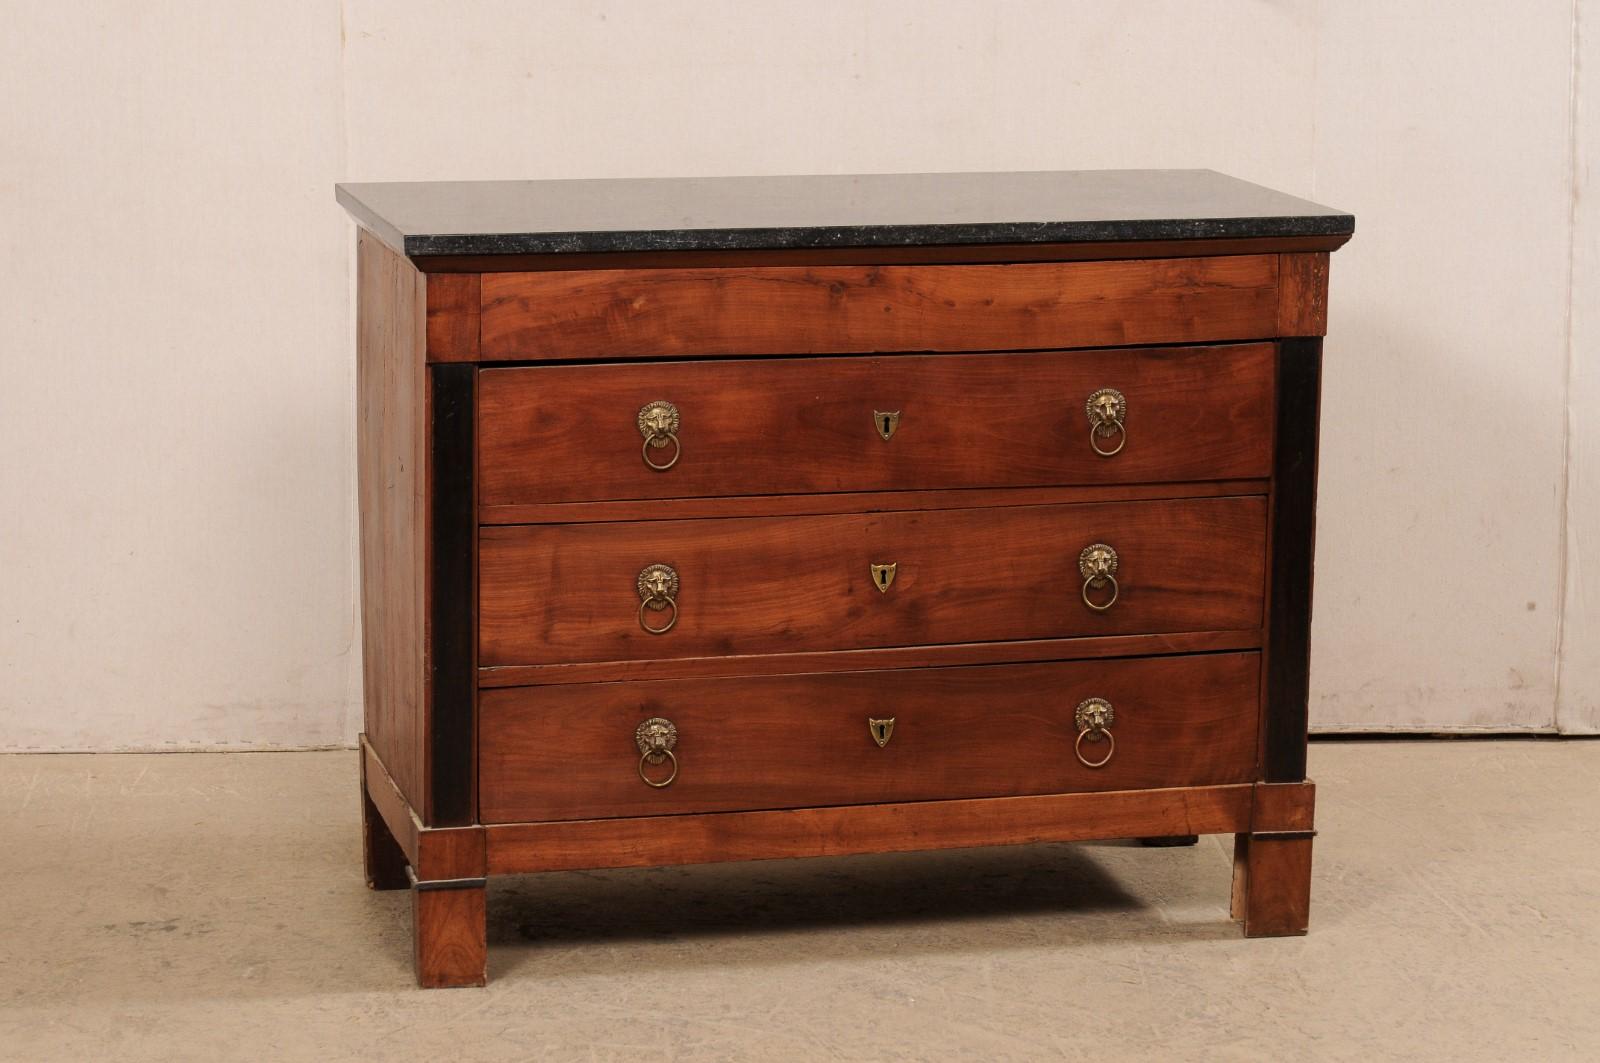 A French Neoclassical commode with four drawers and marble top from the 19th century. This antique chest from France features a rectangular-shaped marble top, over case which houses four drawers (upper drawer is disguised within the top frieze),